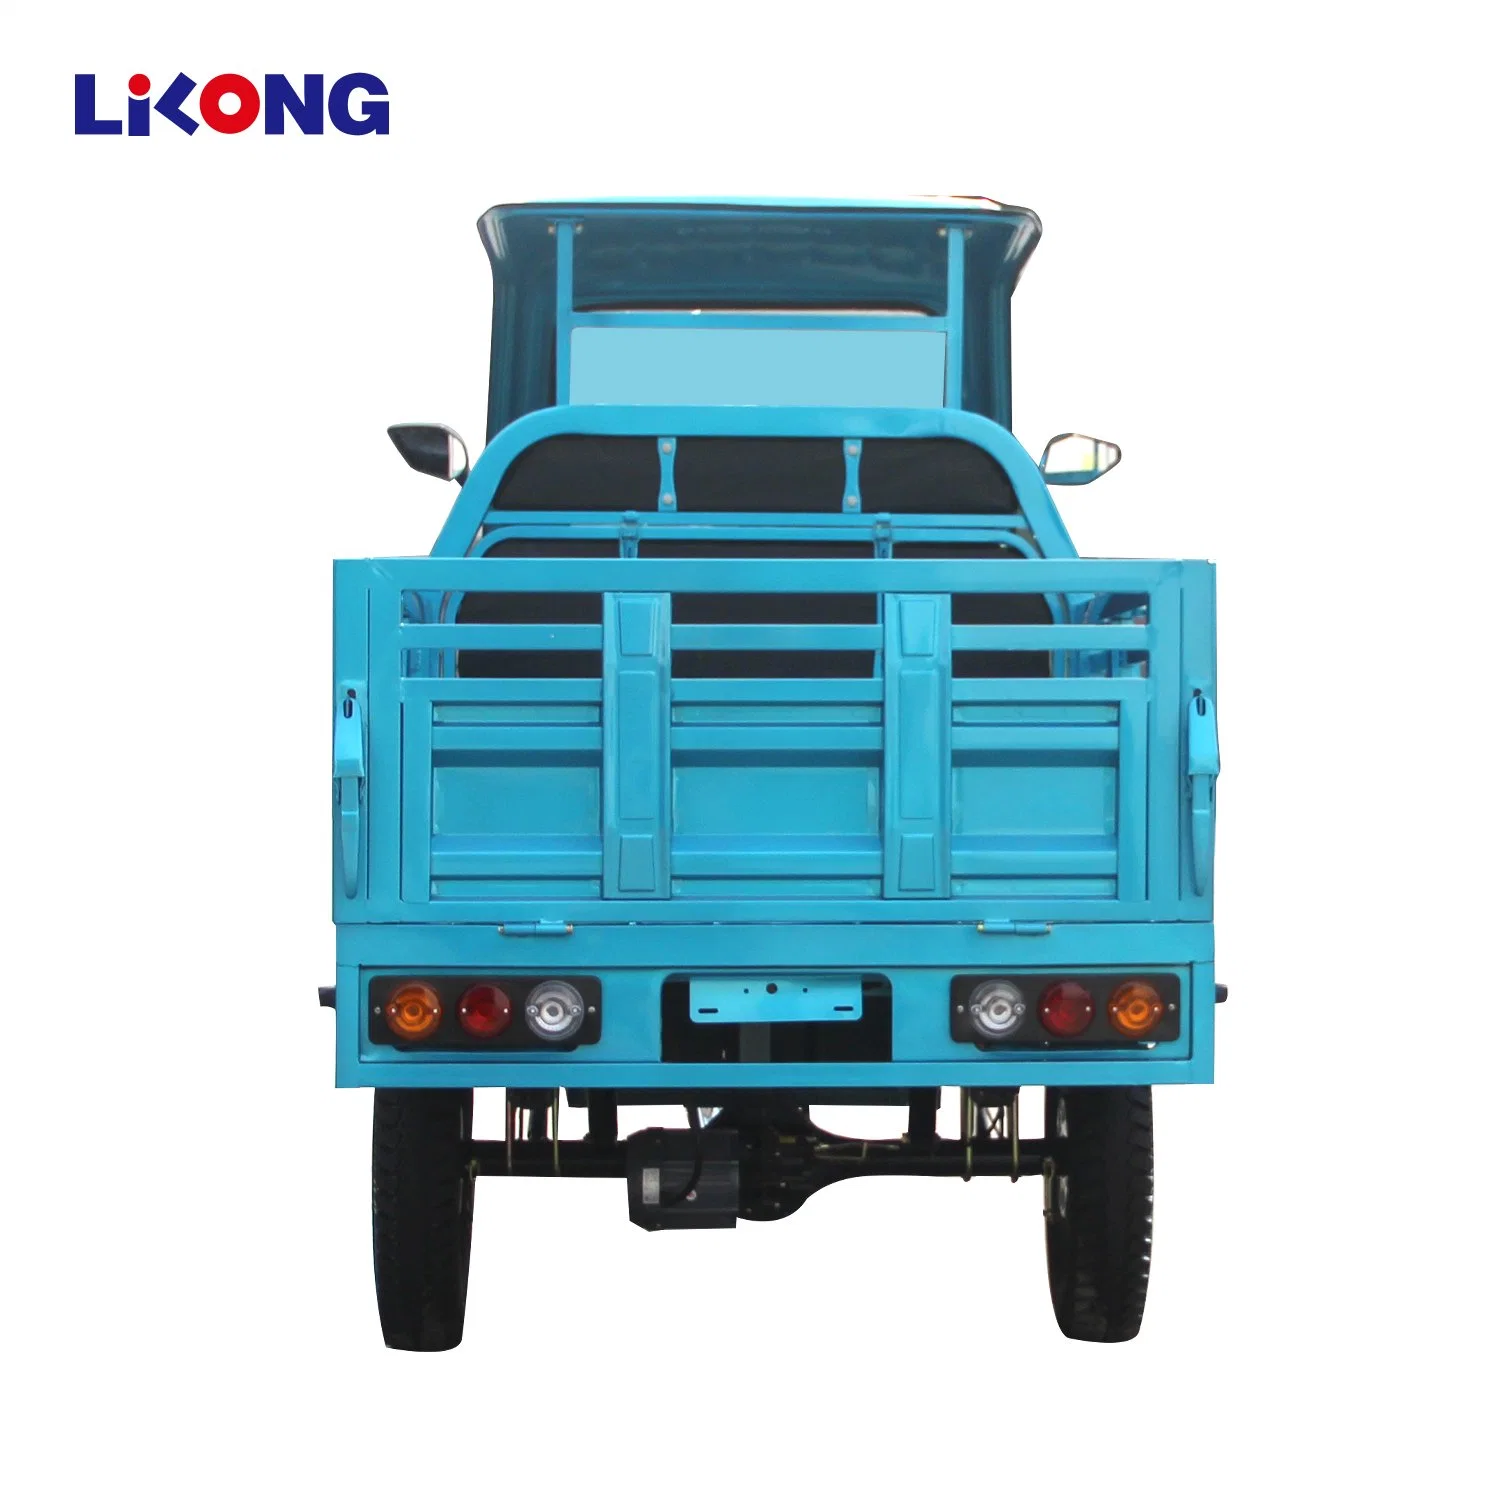 New Arrival EEC Certified Cargo Tricycle Heavy Load Three Wheel Electric Motorcycle